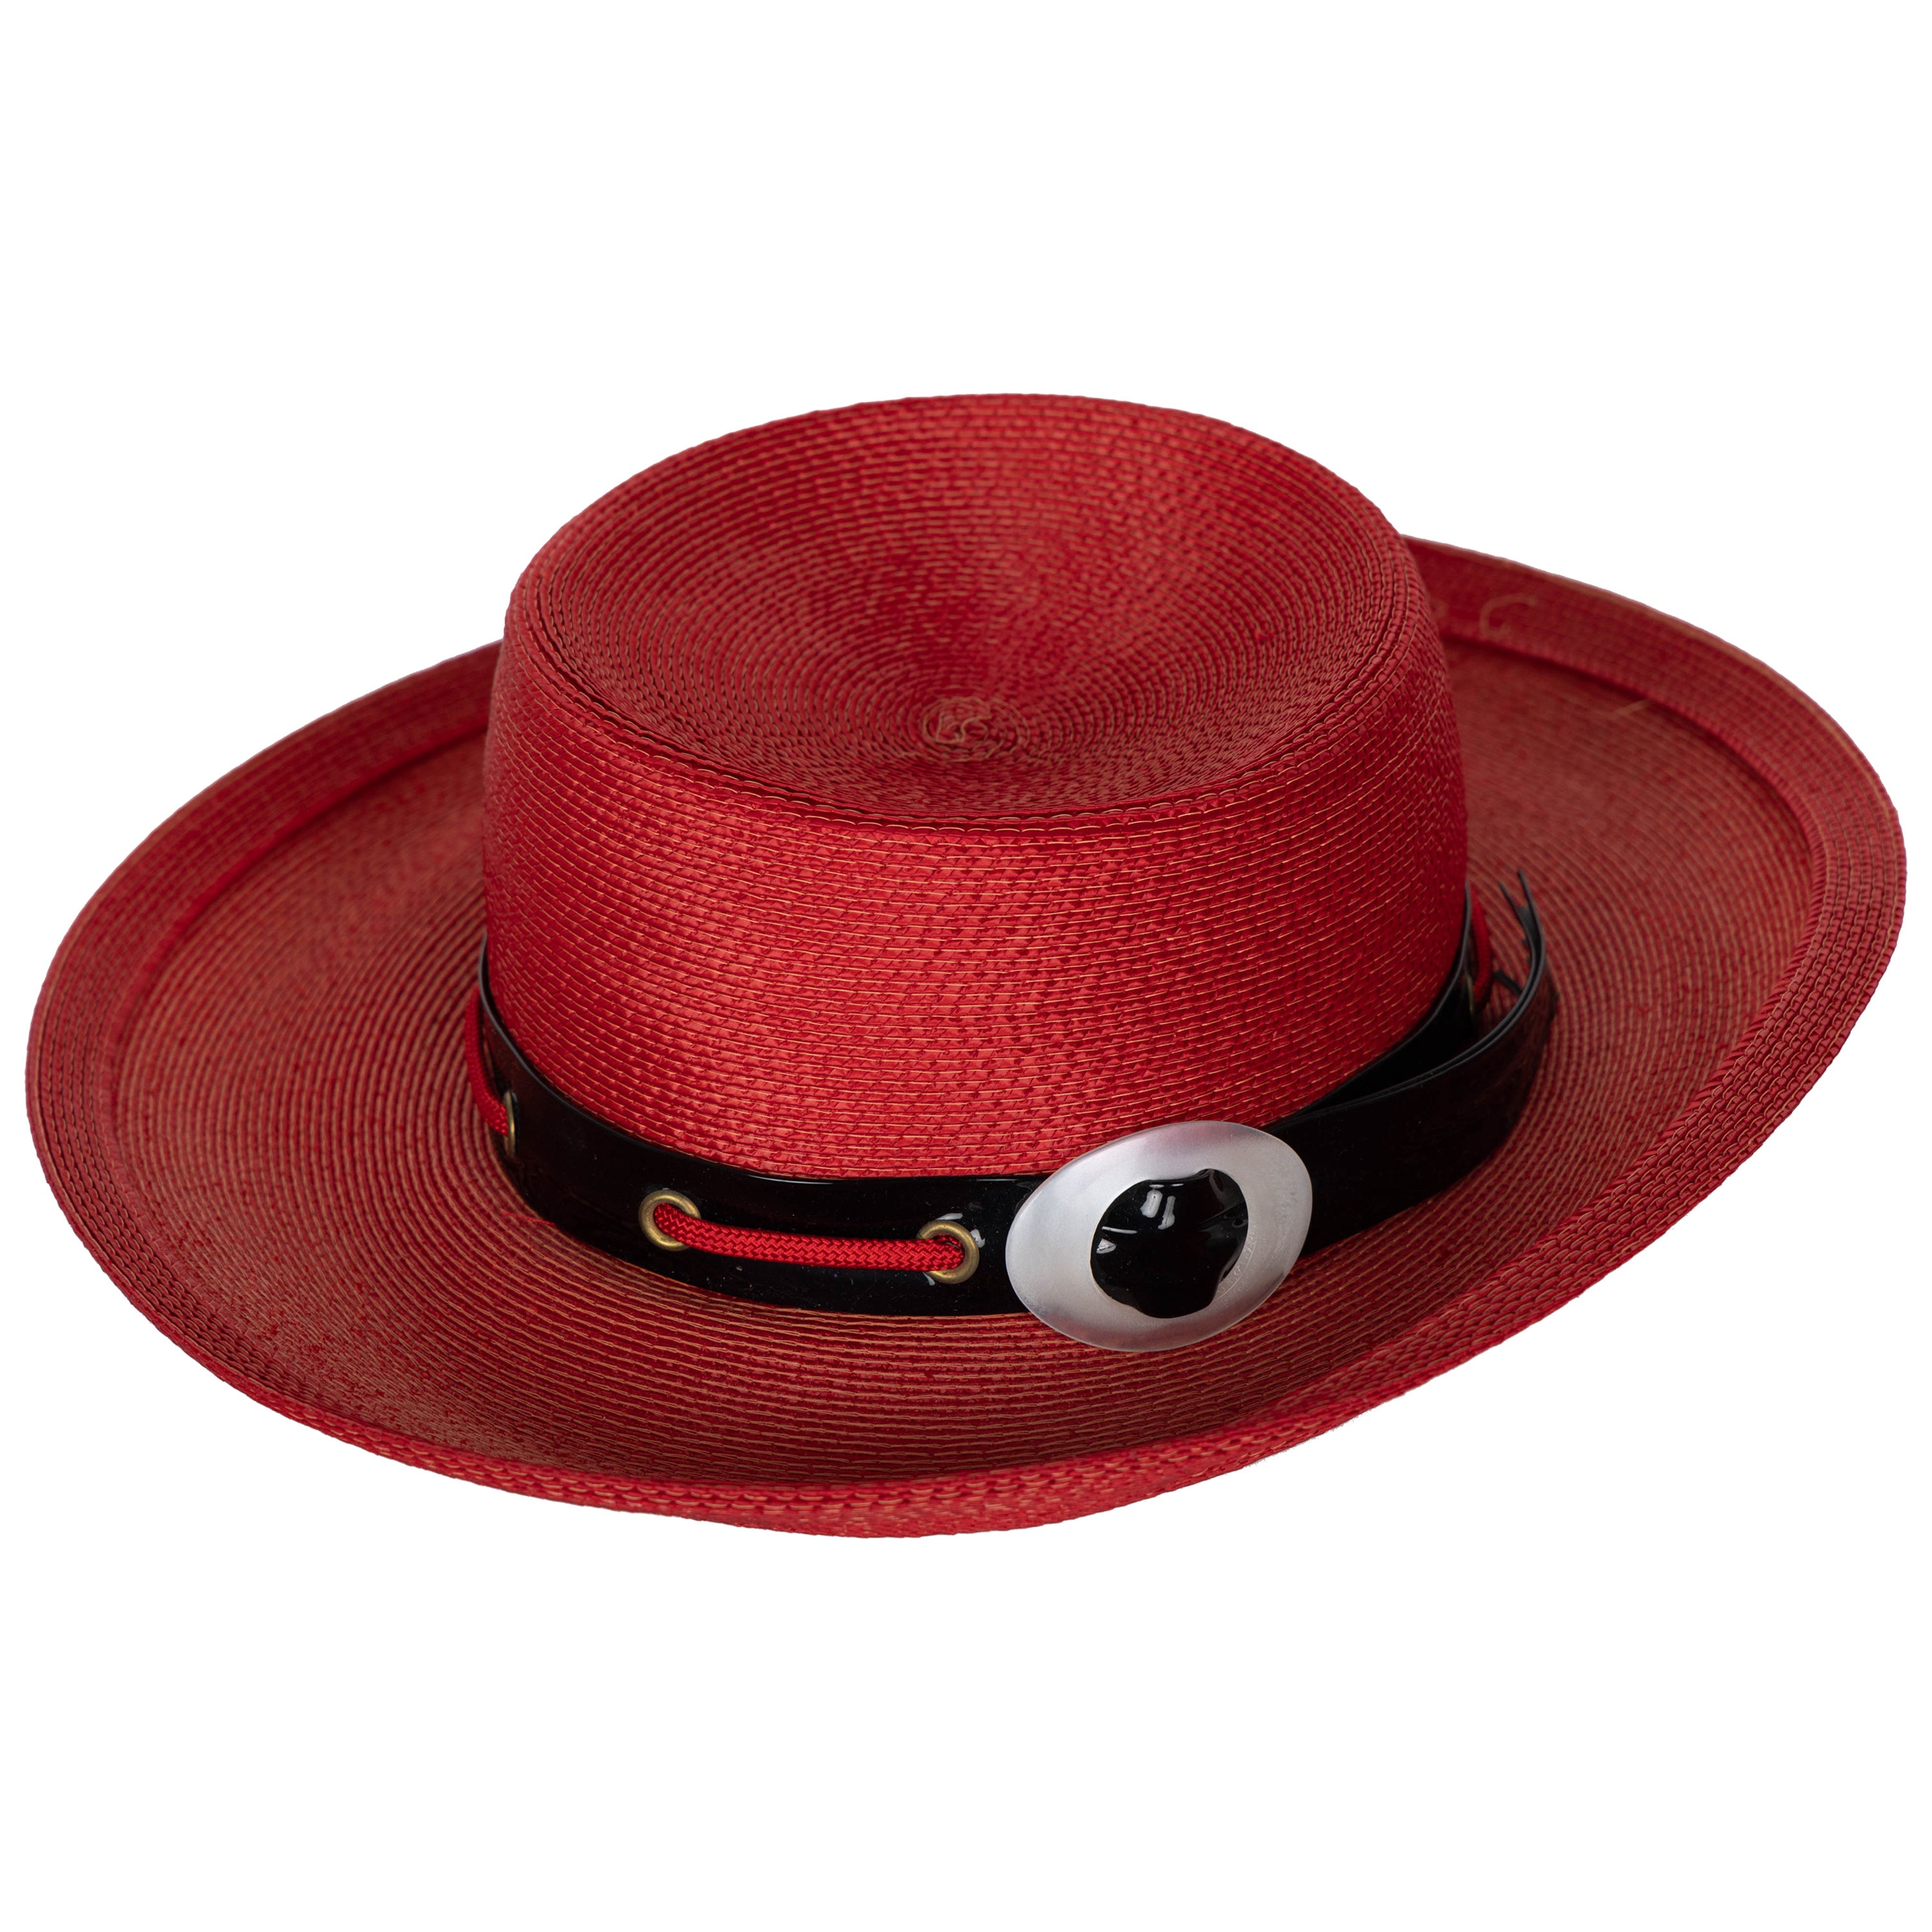 Yves Saint Laurent Red Straw Back Patent Lucite trim Hat, 1970s For Sale